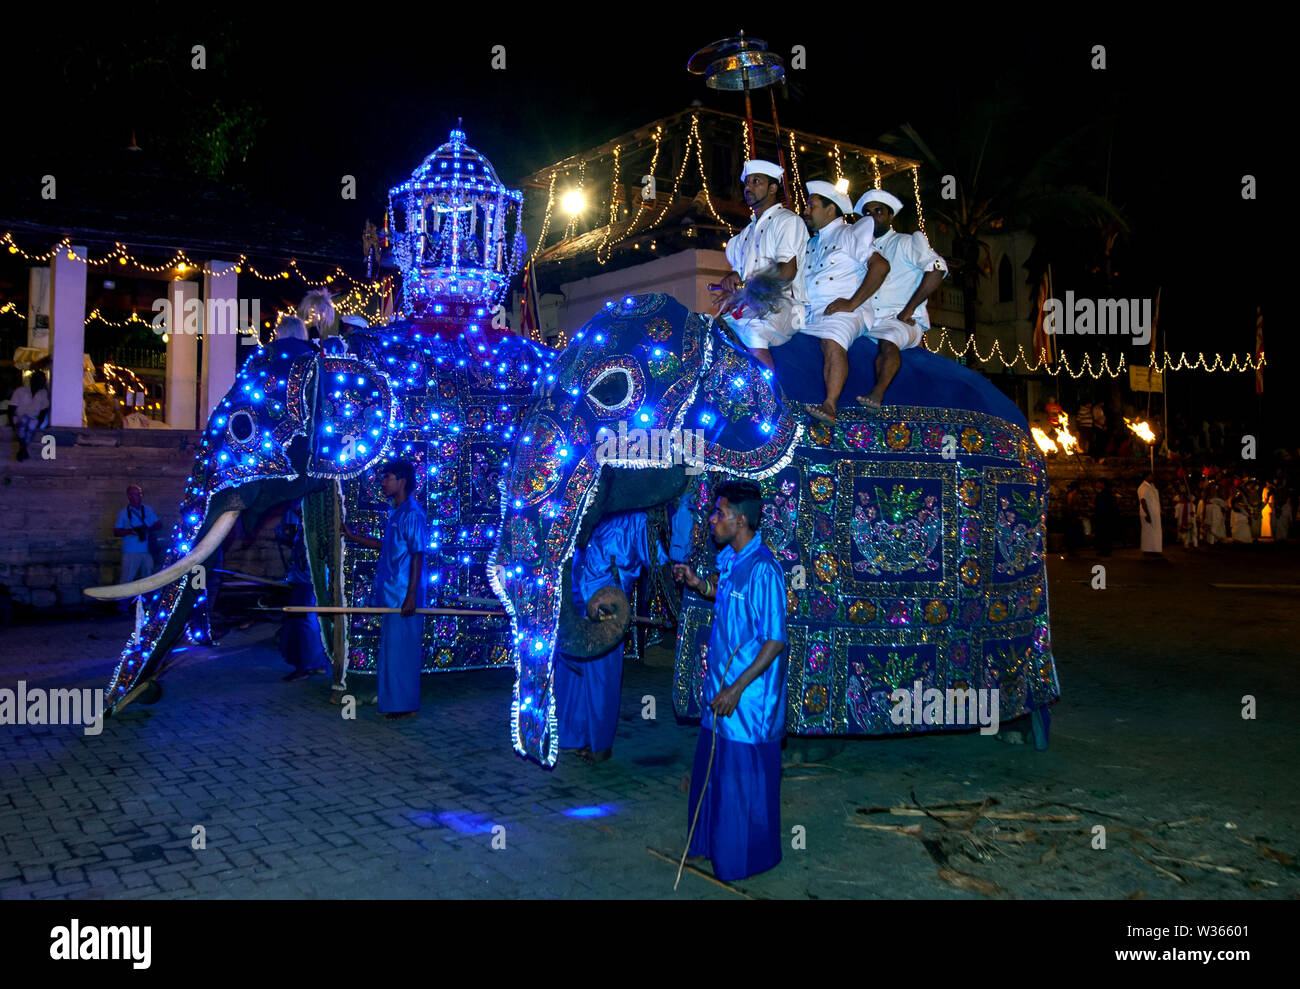 Ceremonial elephants dressed in blue cloaks parade through the streets of Kandy in Sri Lanka during the Buddhist Esala Perahera (great procession). Stock Photo